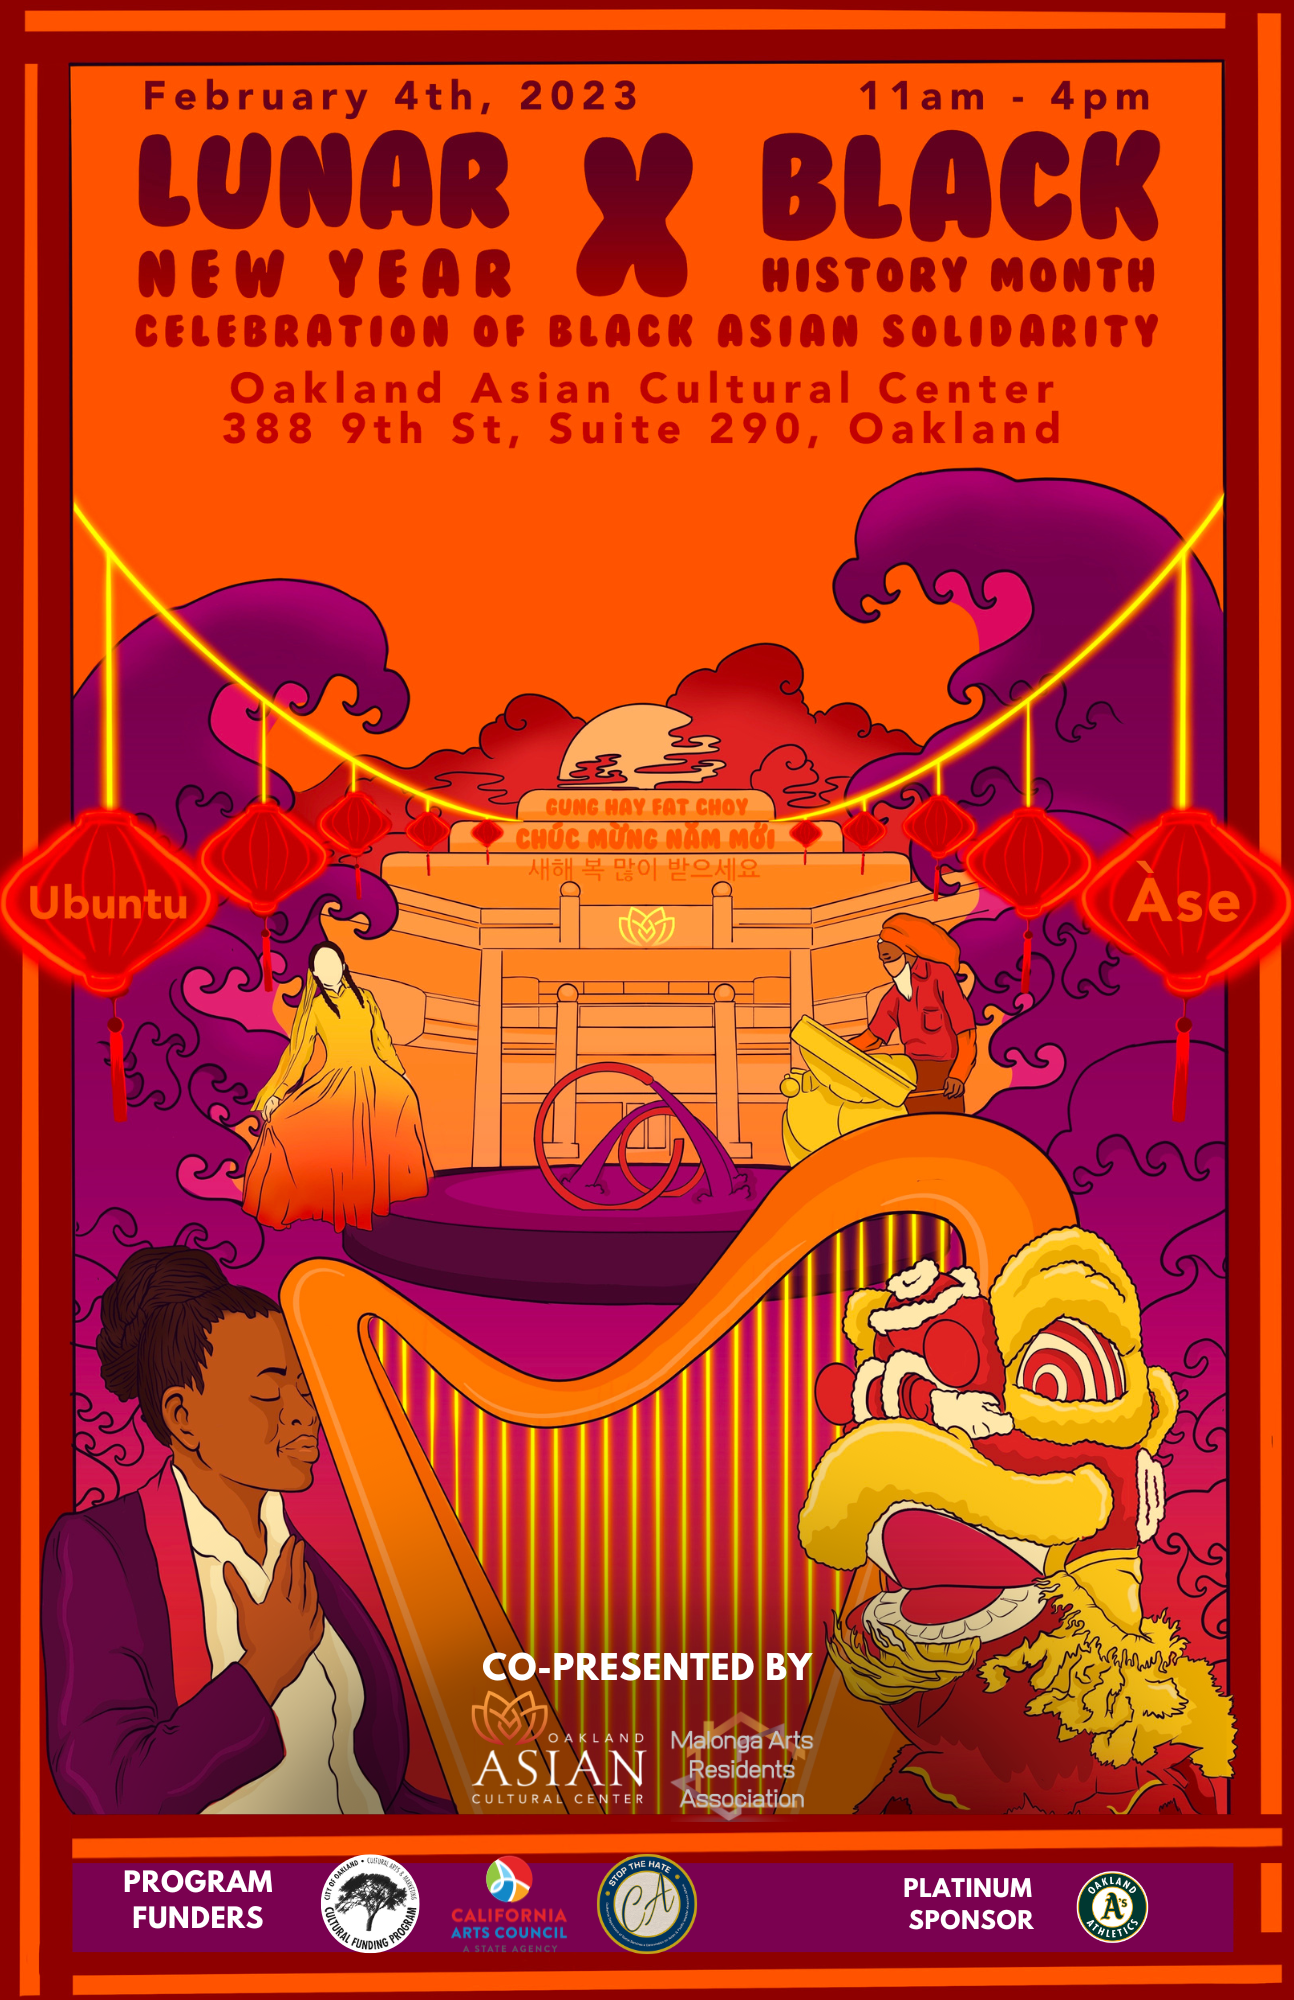 orange flyer for event details: February 4th, 2023. 11am-4pm. Lunar New Year x Black History Month. Celebration of black Asian Solidarity. Oakland Asian Cultural Center 388 9th St, Suite 290, Oakland